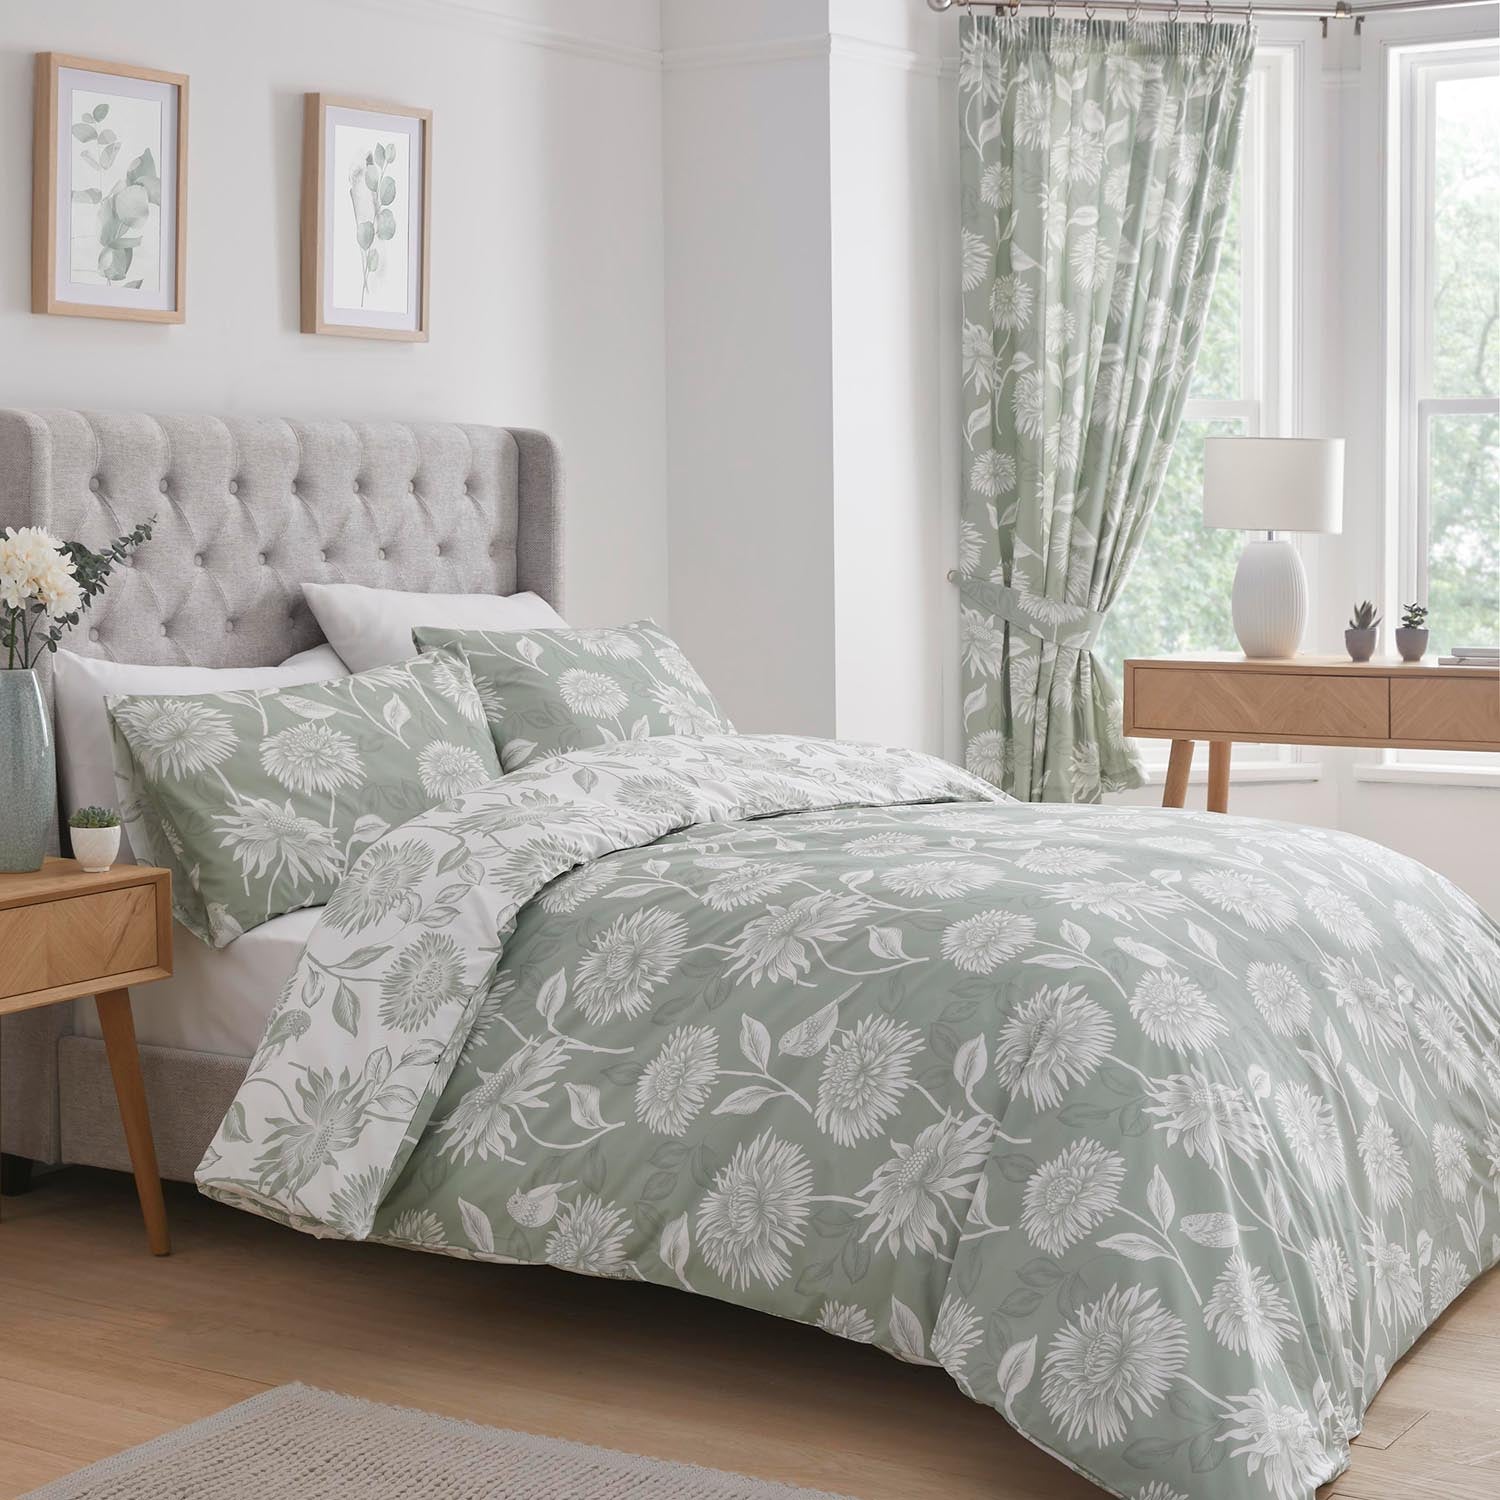  The Home Collection Veronique Teal Duvet Cover Set 1 Shaws Department Stores